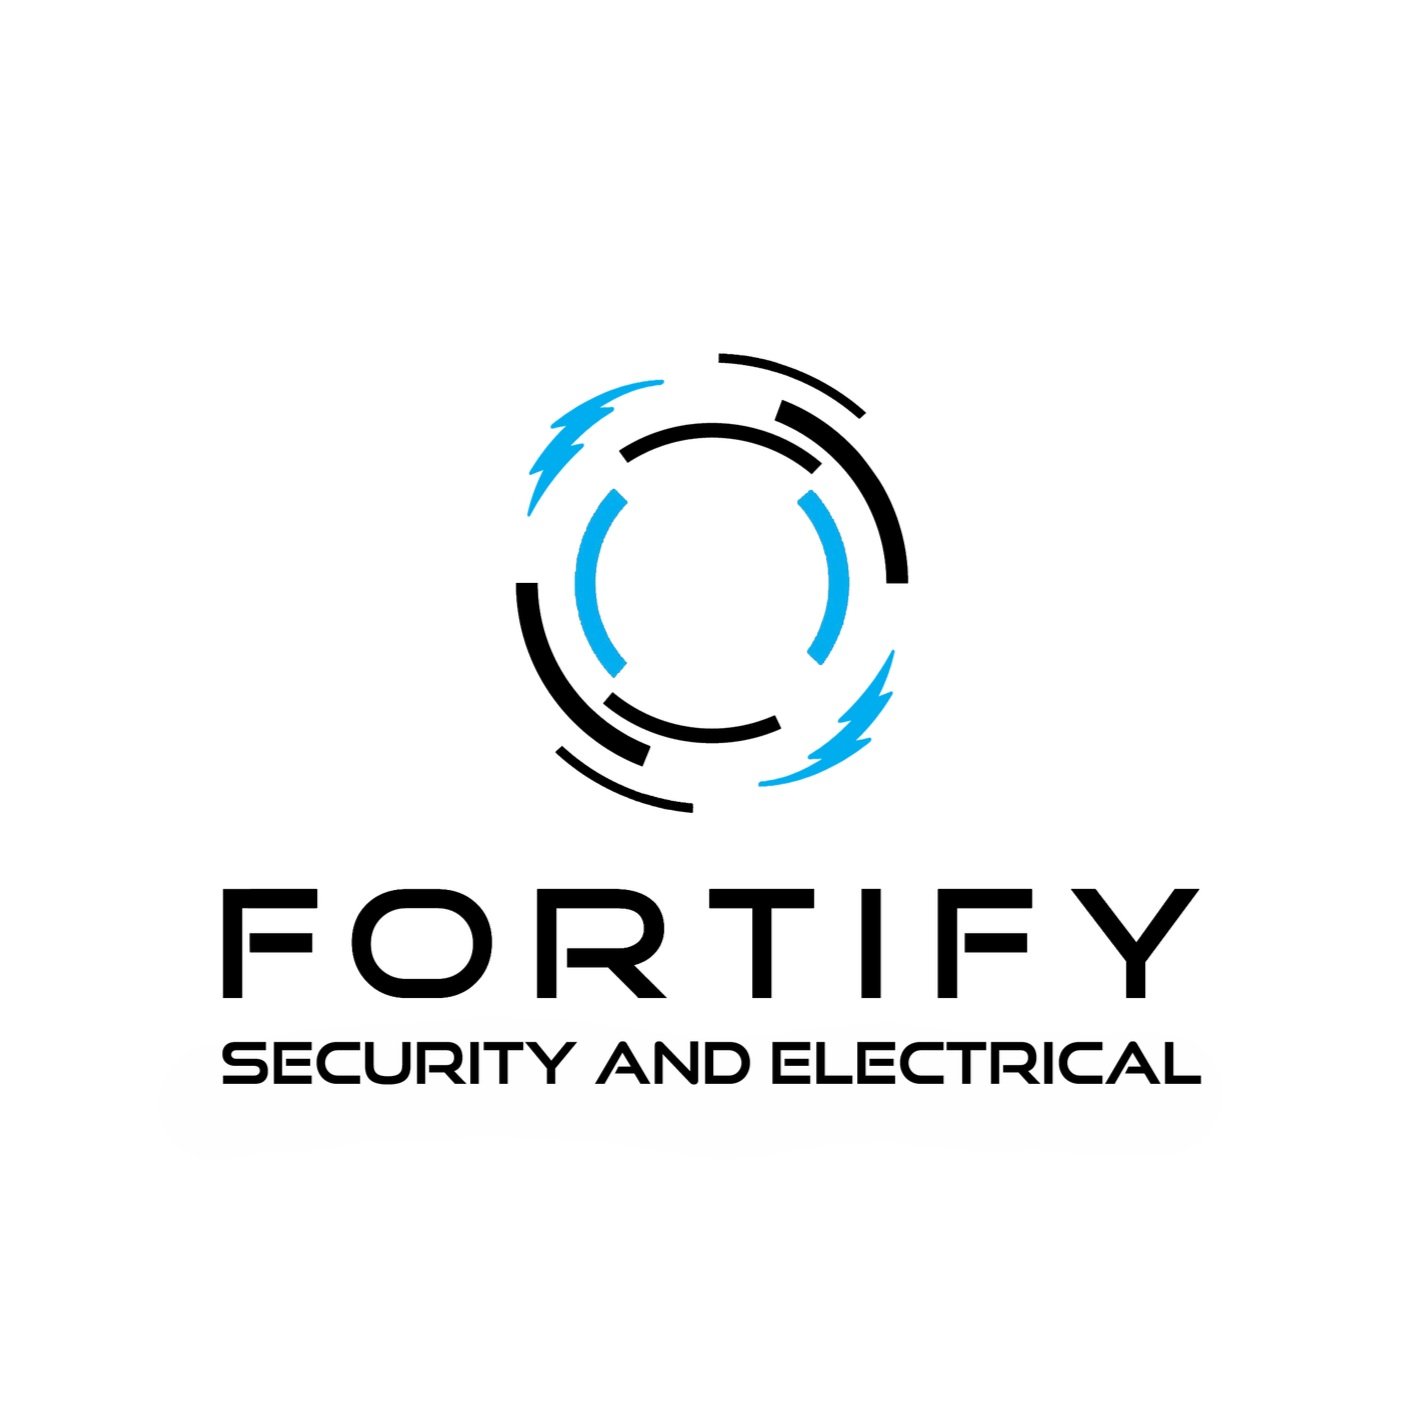 Fortify Security and Electrical - Cameras, Alarms and Electrical